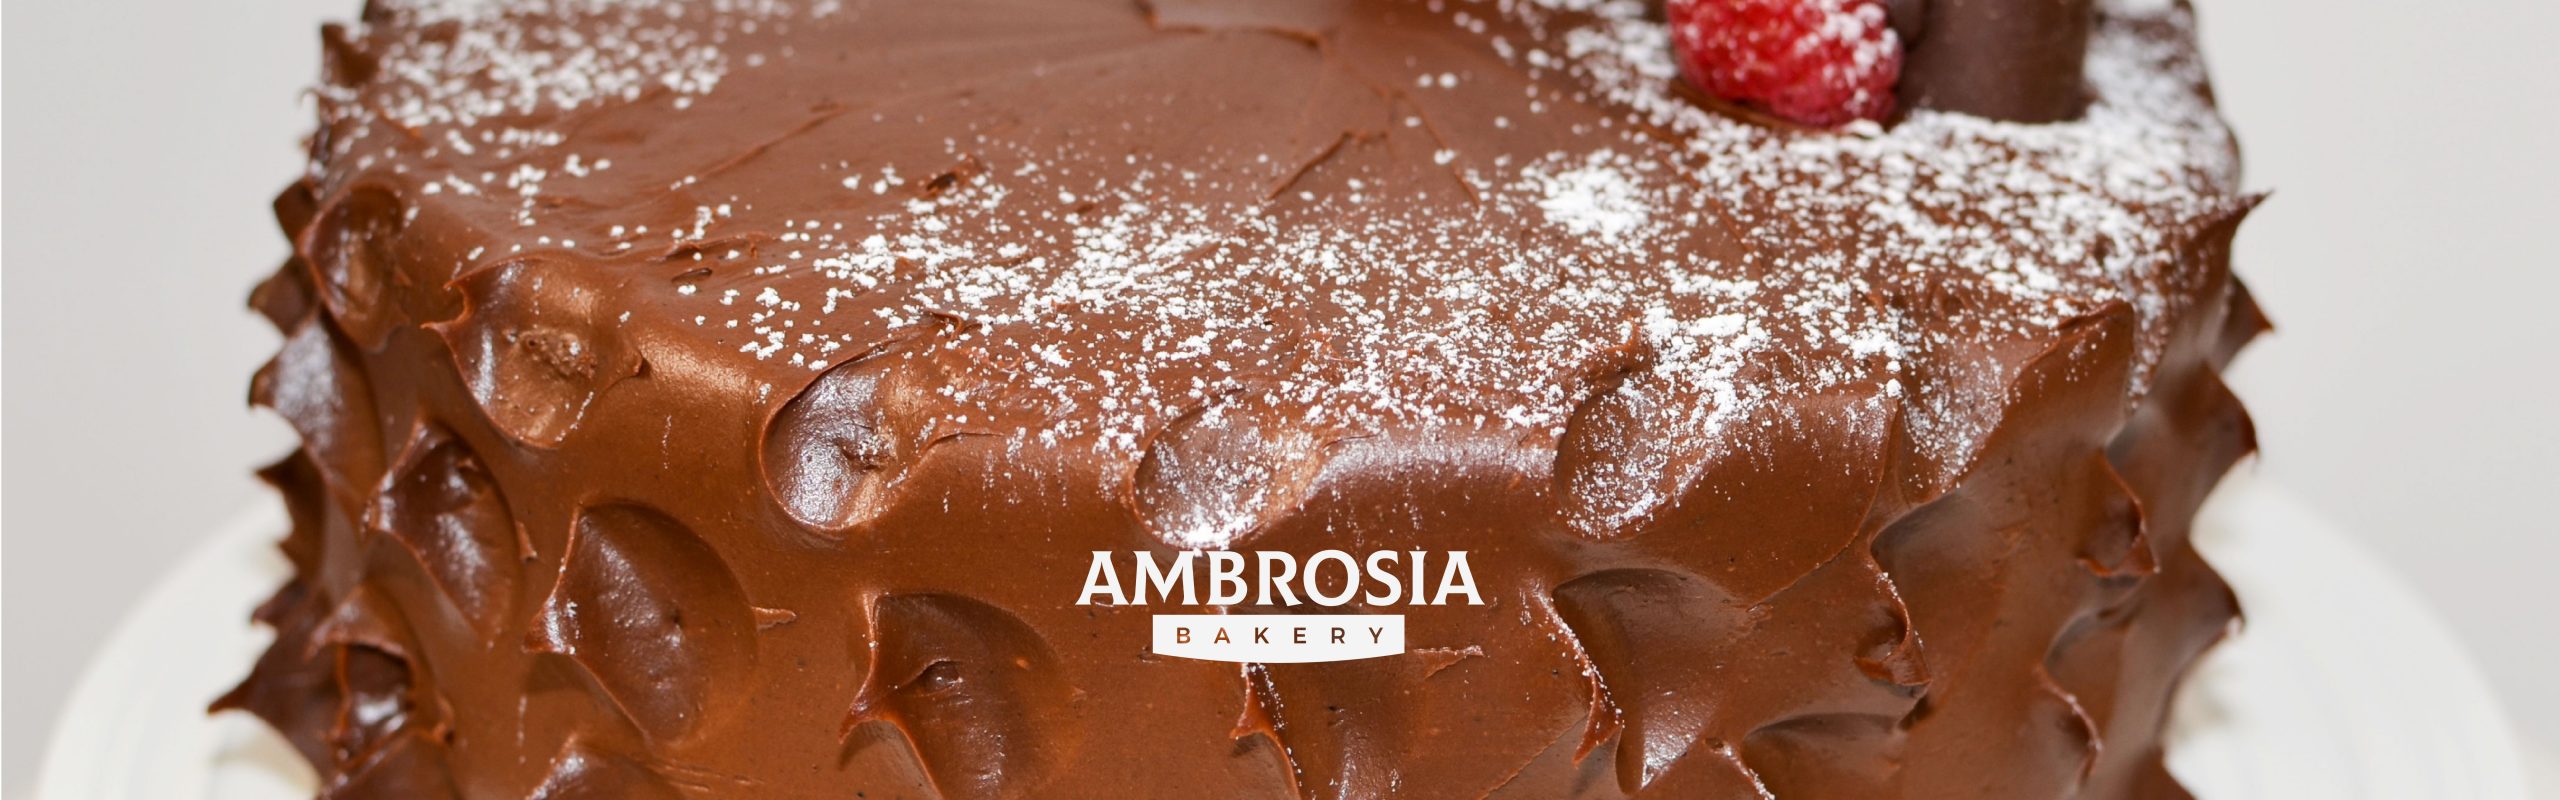 A close-up view of a chocolate frosted cake with the text "Ambrosia Bakery" on it, garnished with a dusting of powdered sugar and a single raspberry on top.